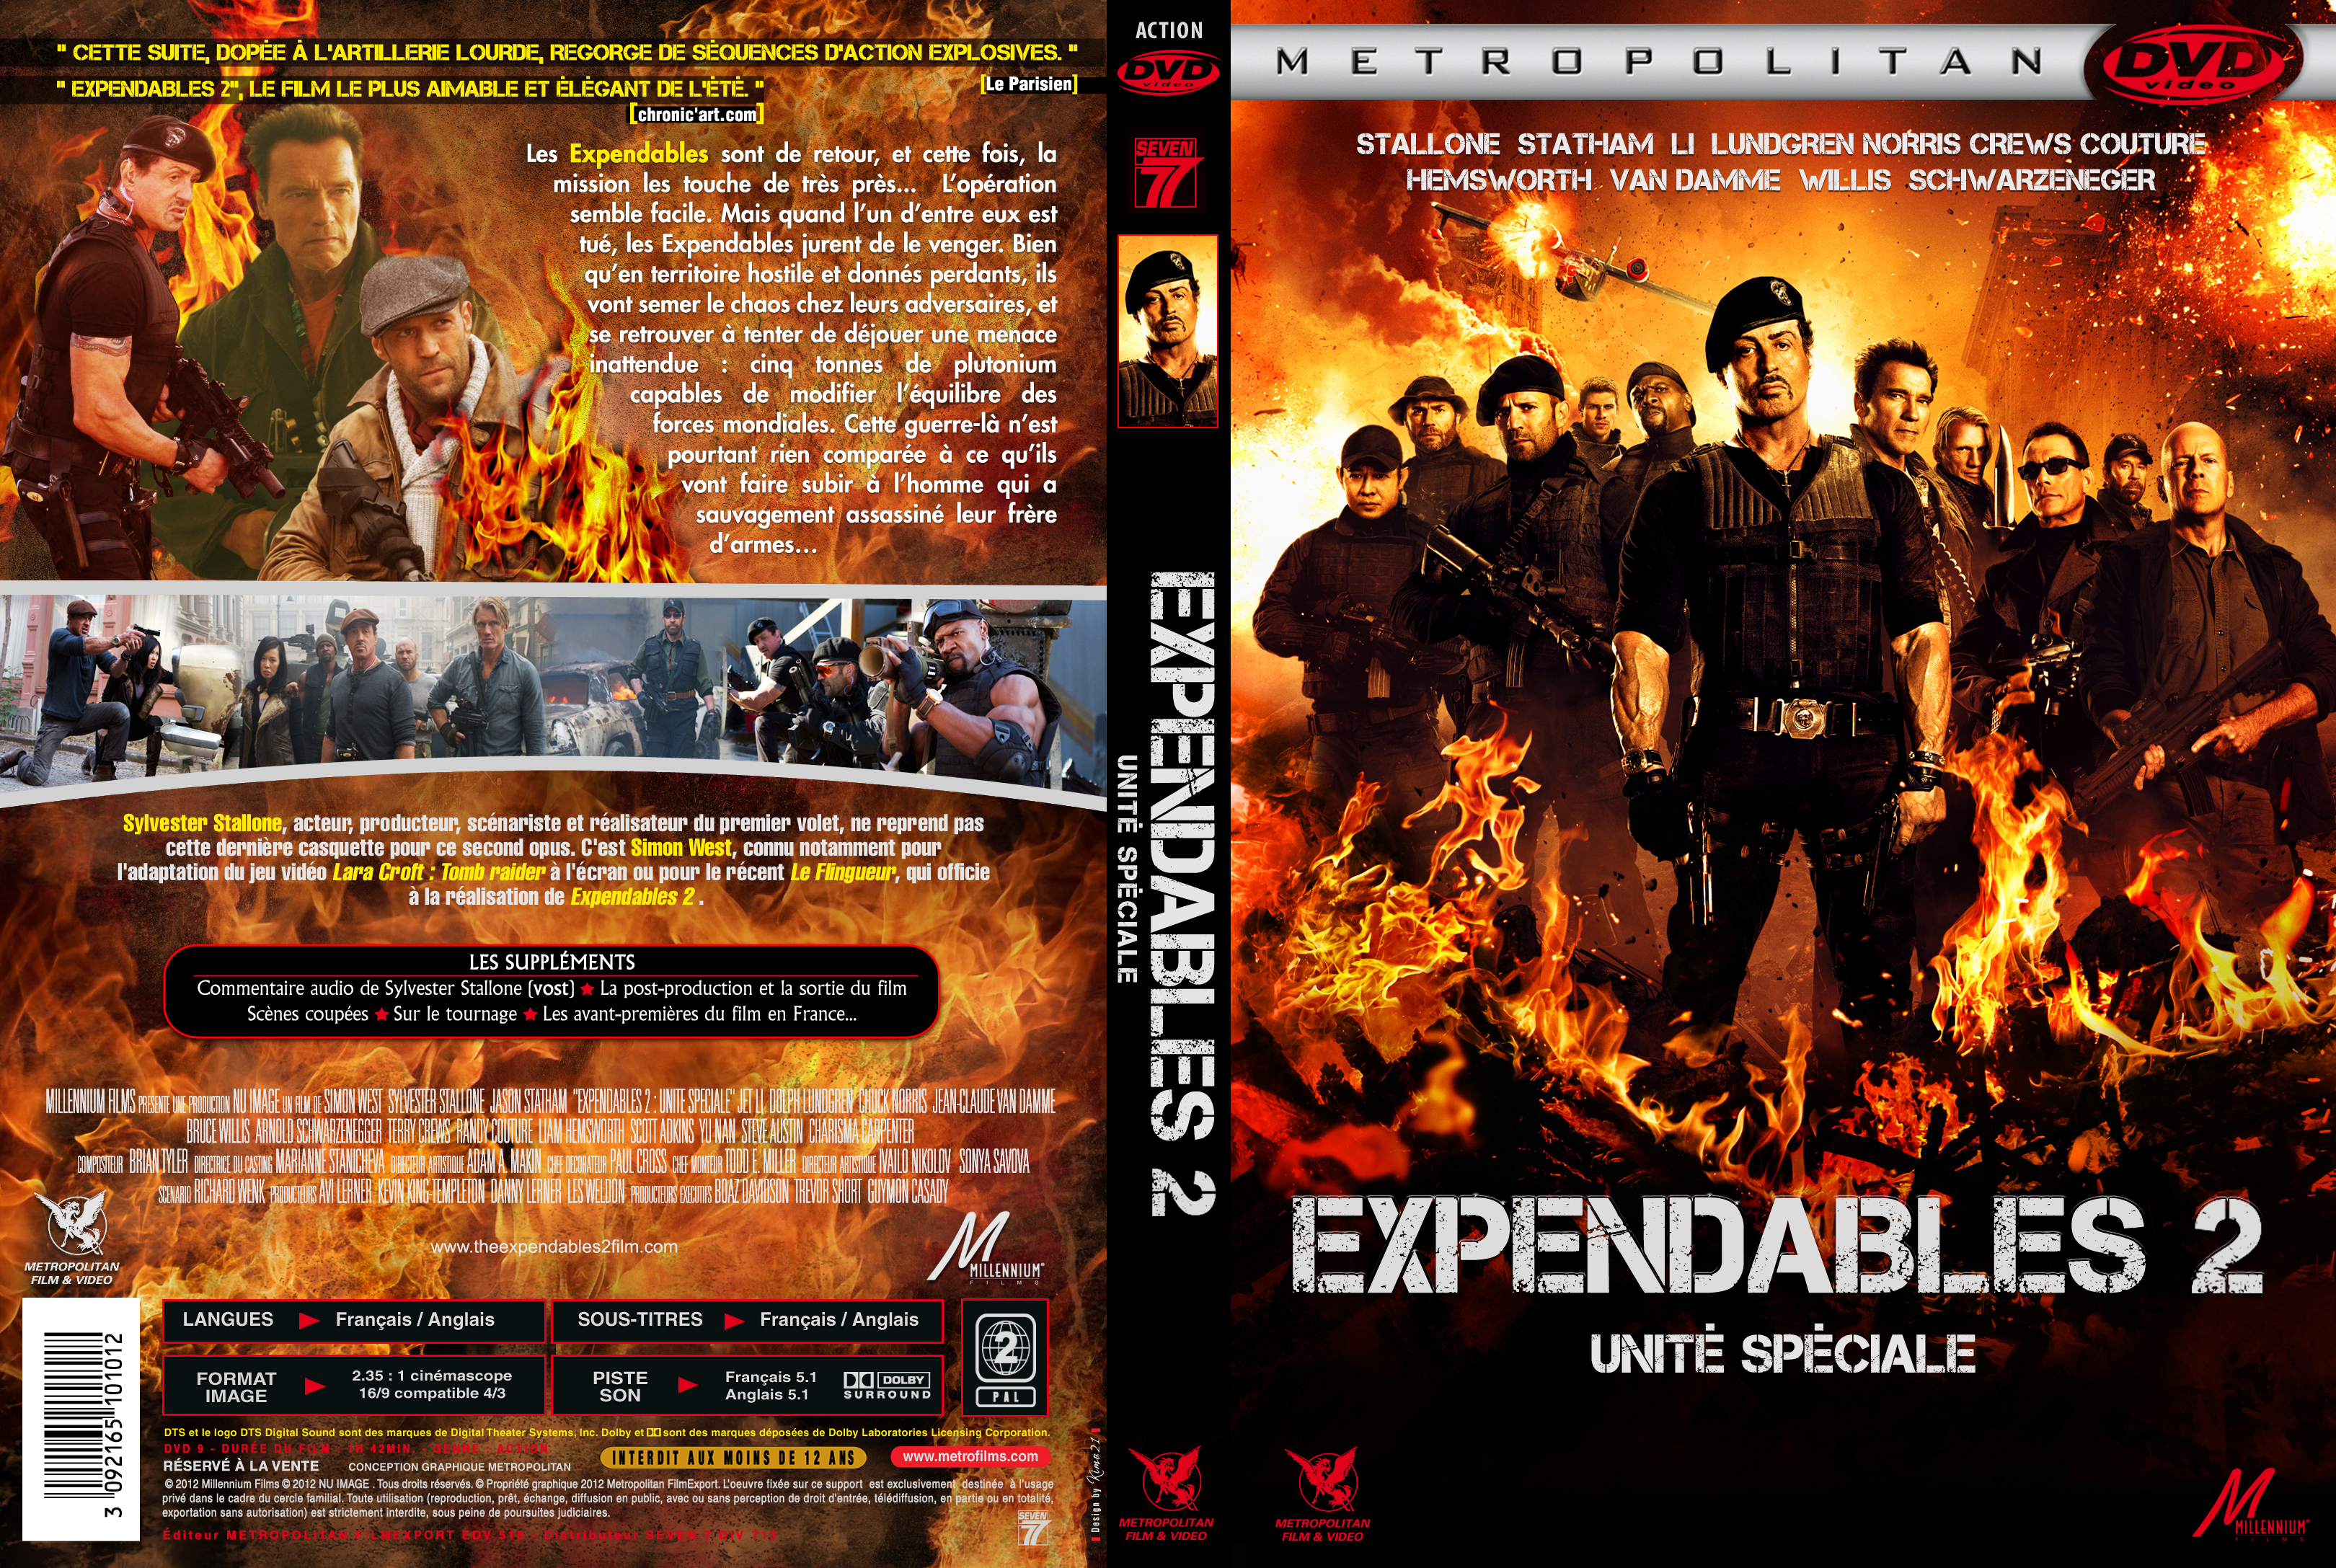 Jaquette DVD The Expendables 2 custom